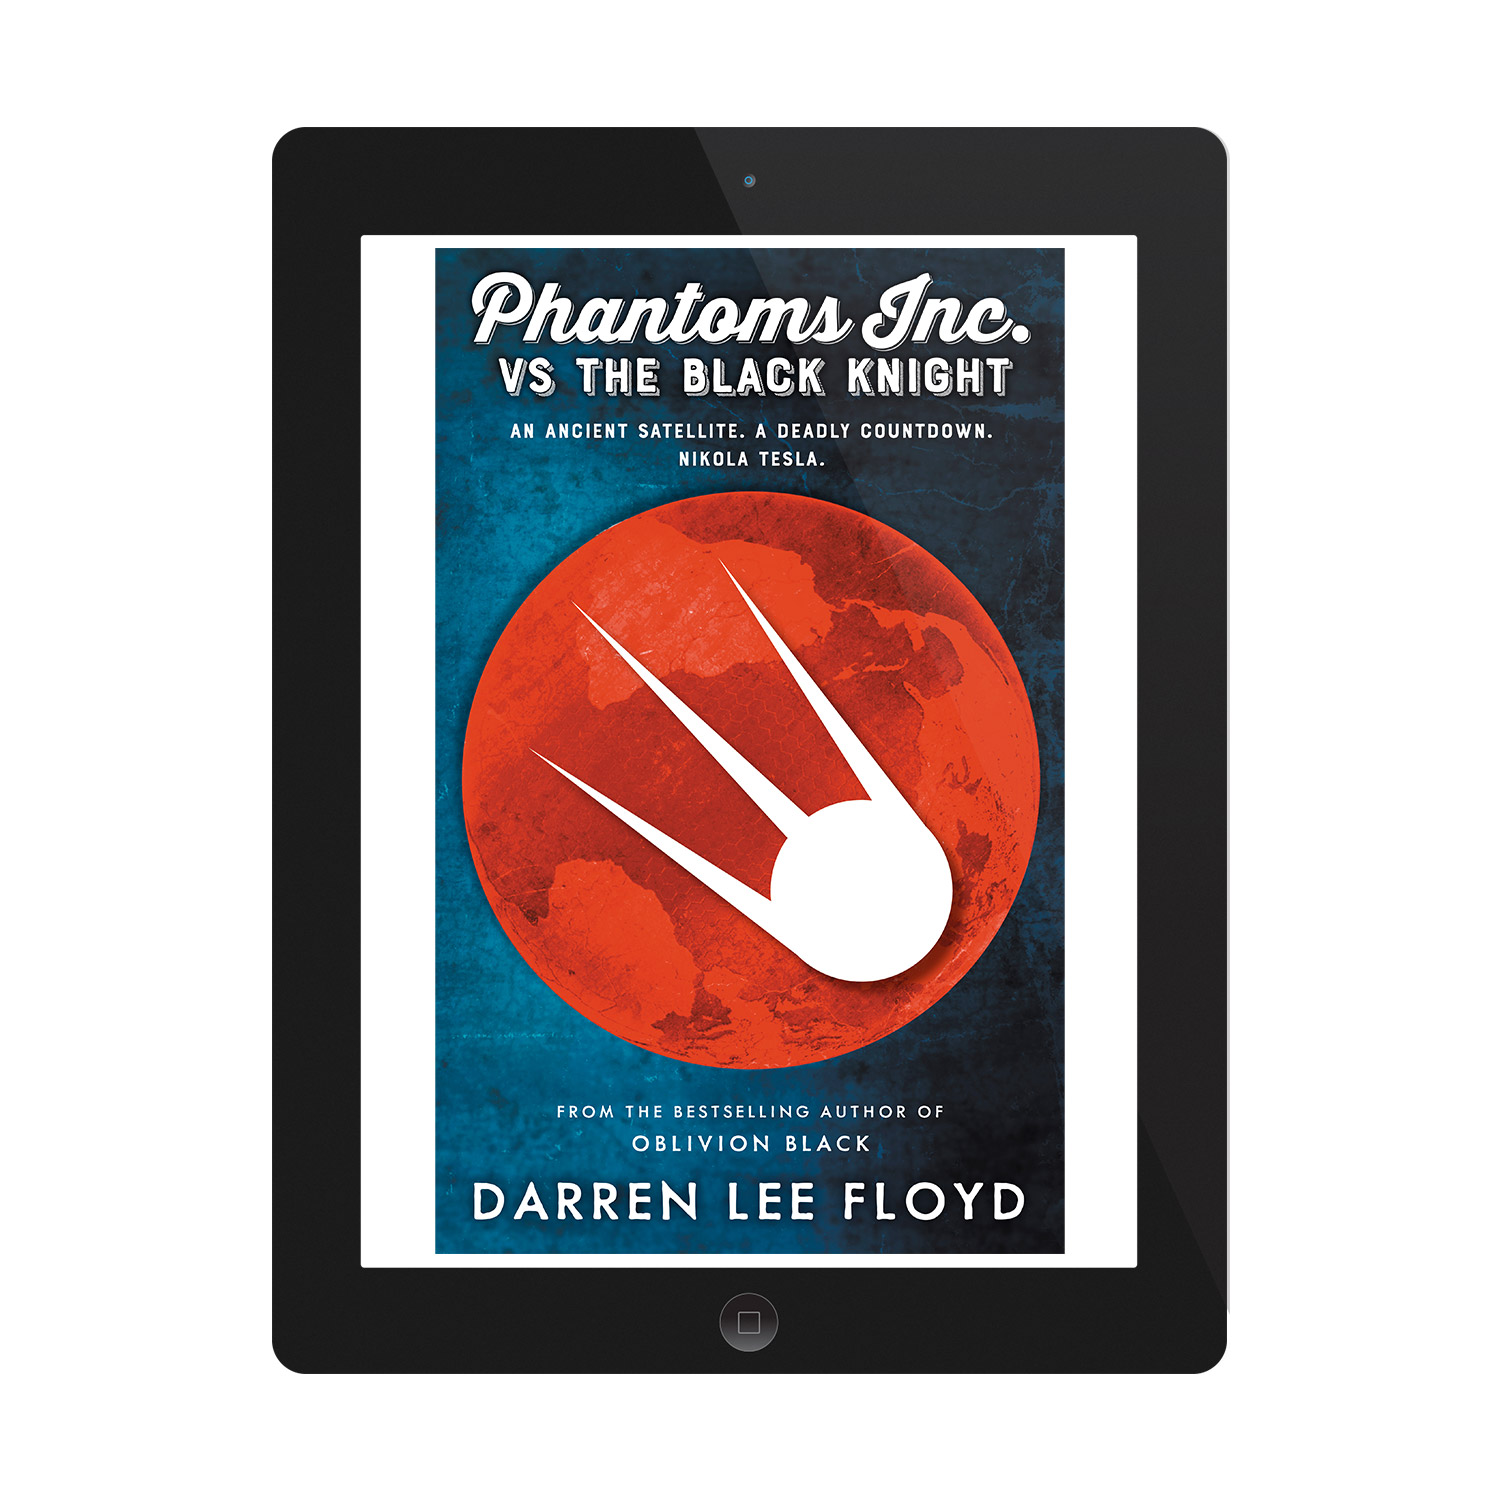 'Phantoms Inc. Vs The Black Knight' is a fun scifi / supernatural hybrid novel. The author is Darren Lee Floyd. The cover and interior design of the book are by Mark Thomas. To learn more about what Mark could do for your book, please visit coverness.com.